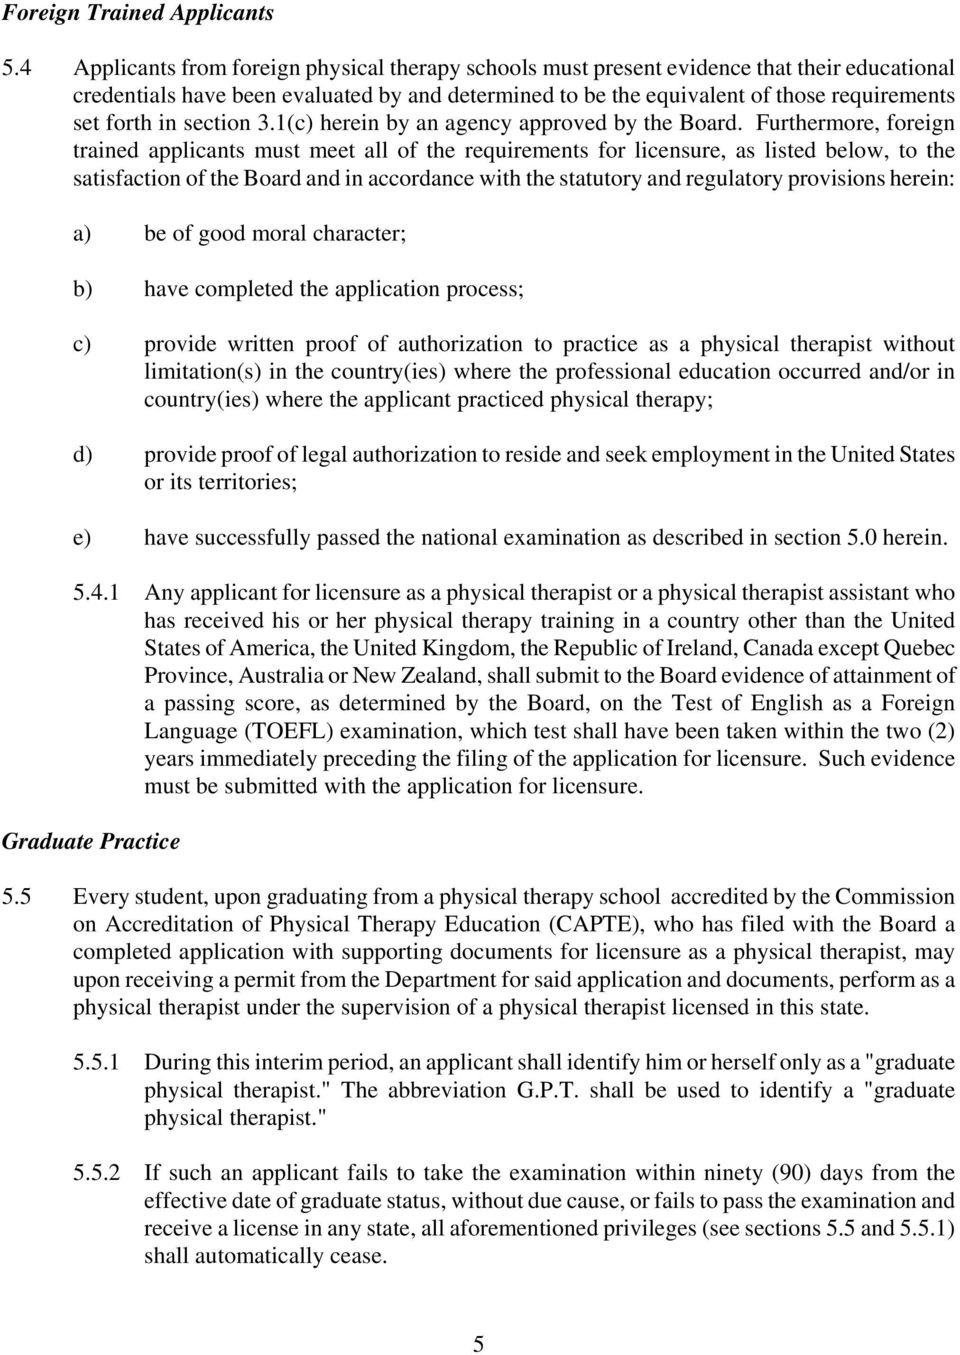 in section 3.1(c) herein by an agency approved by the Board.